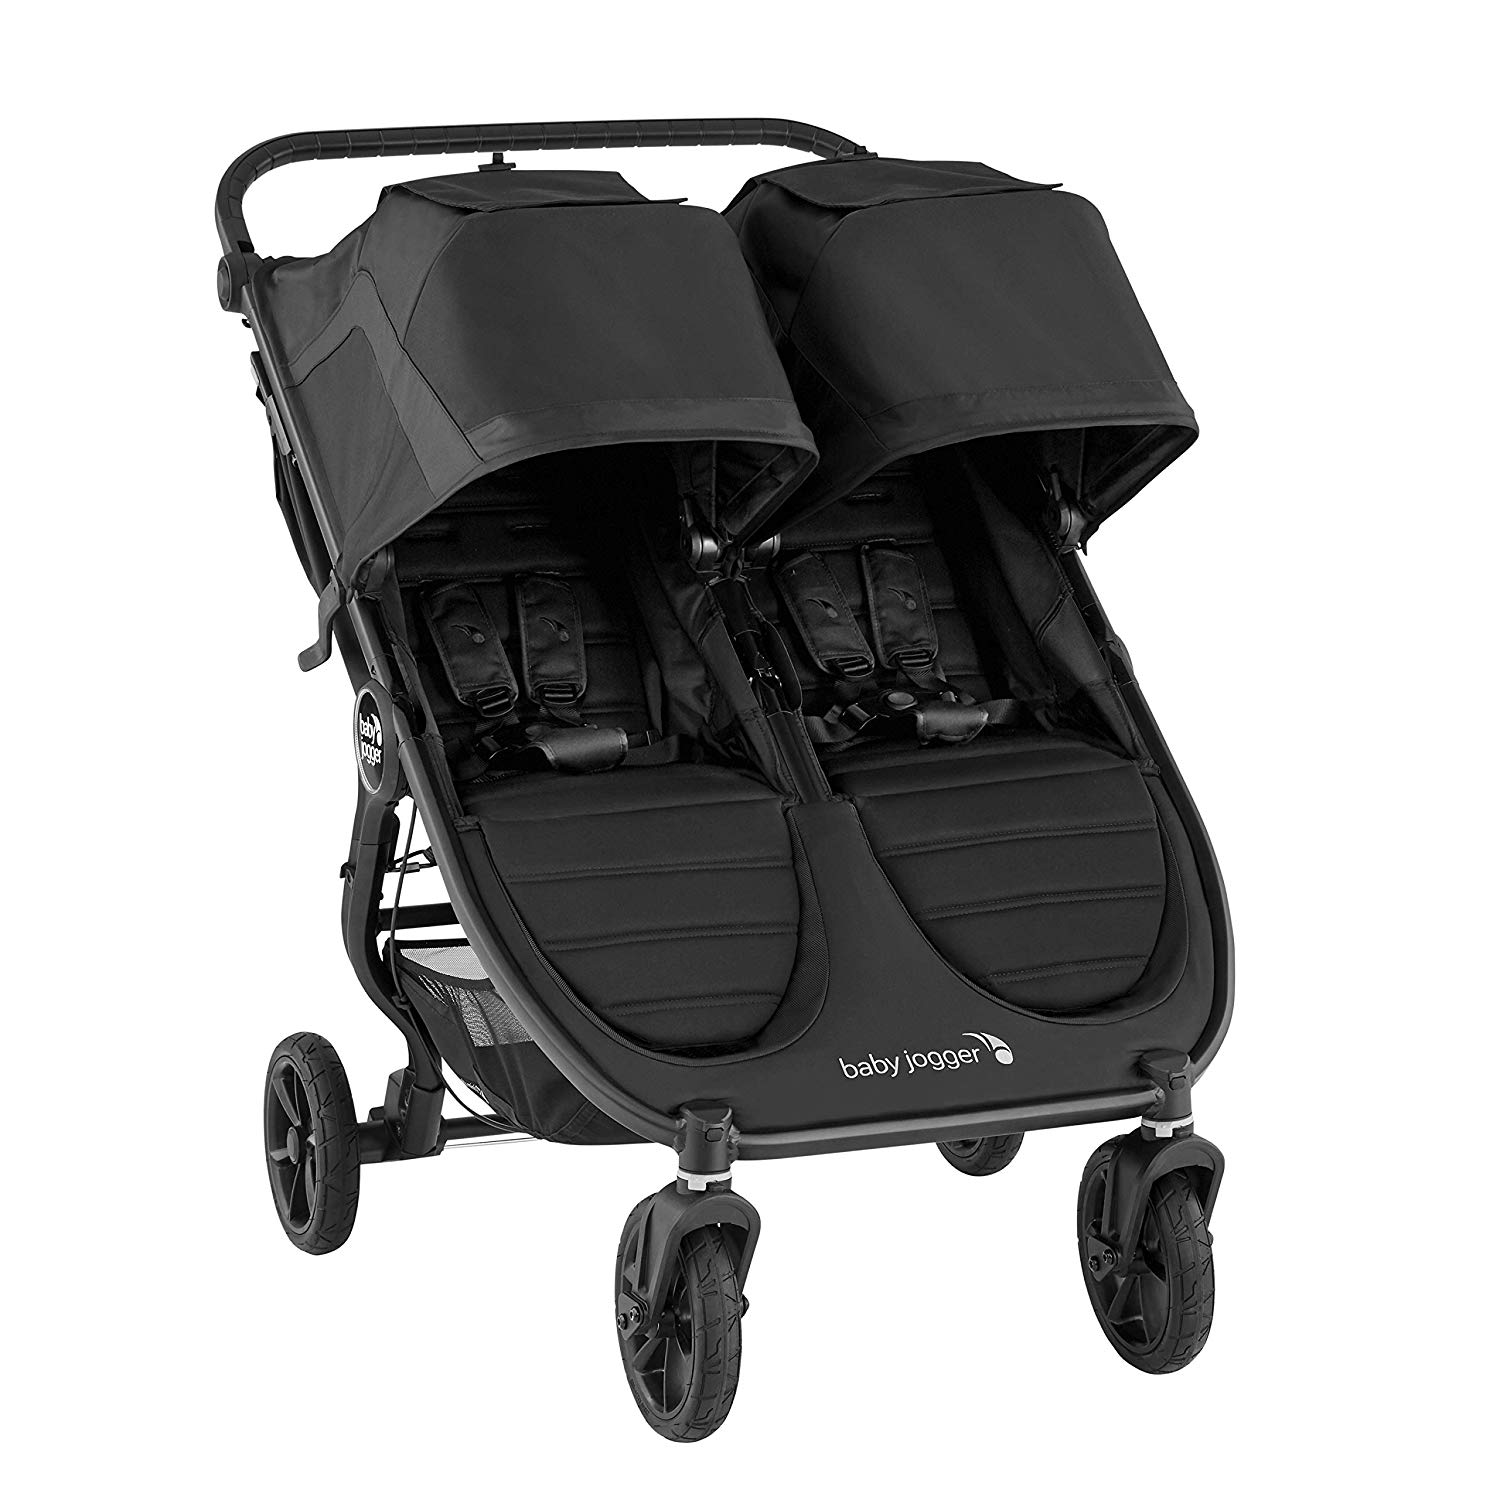 dimensions of city select double stroller